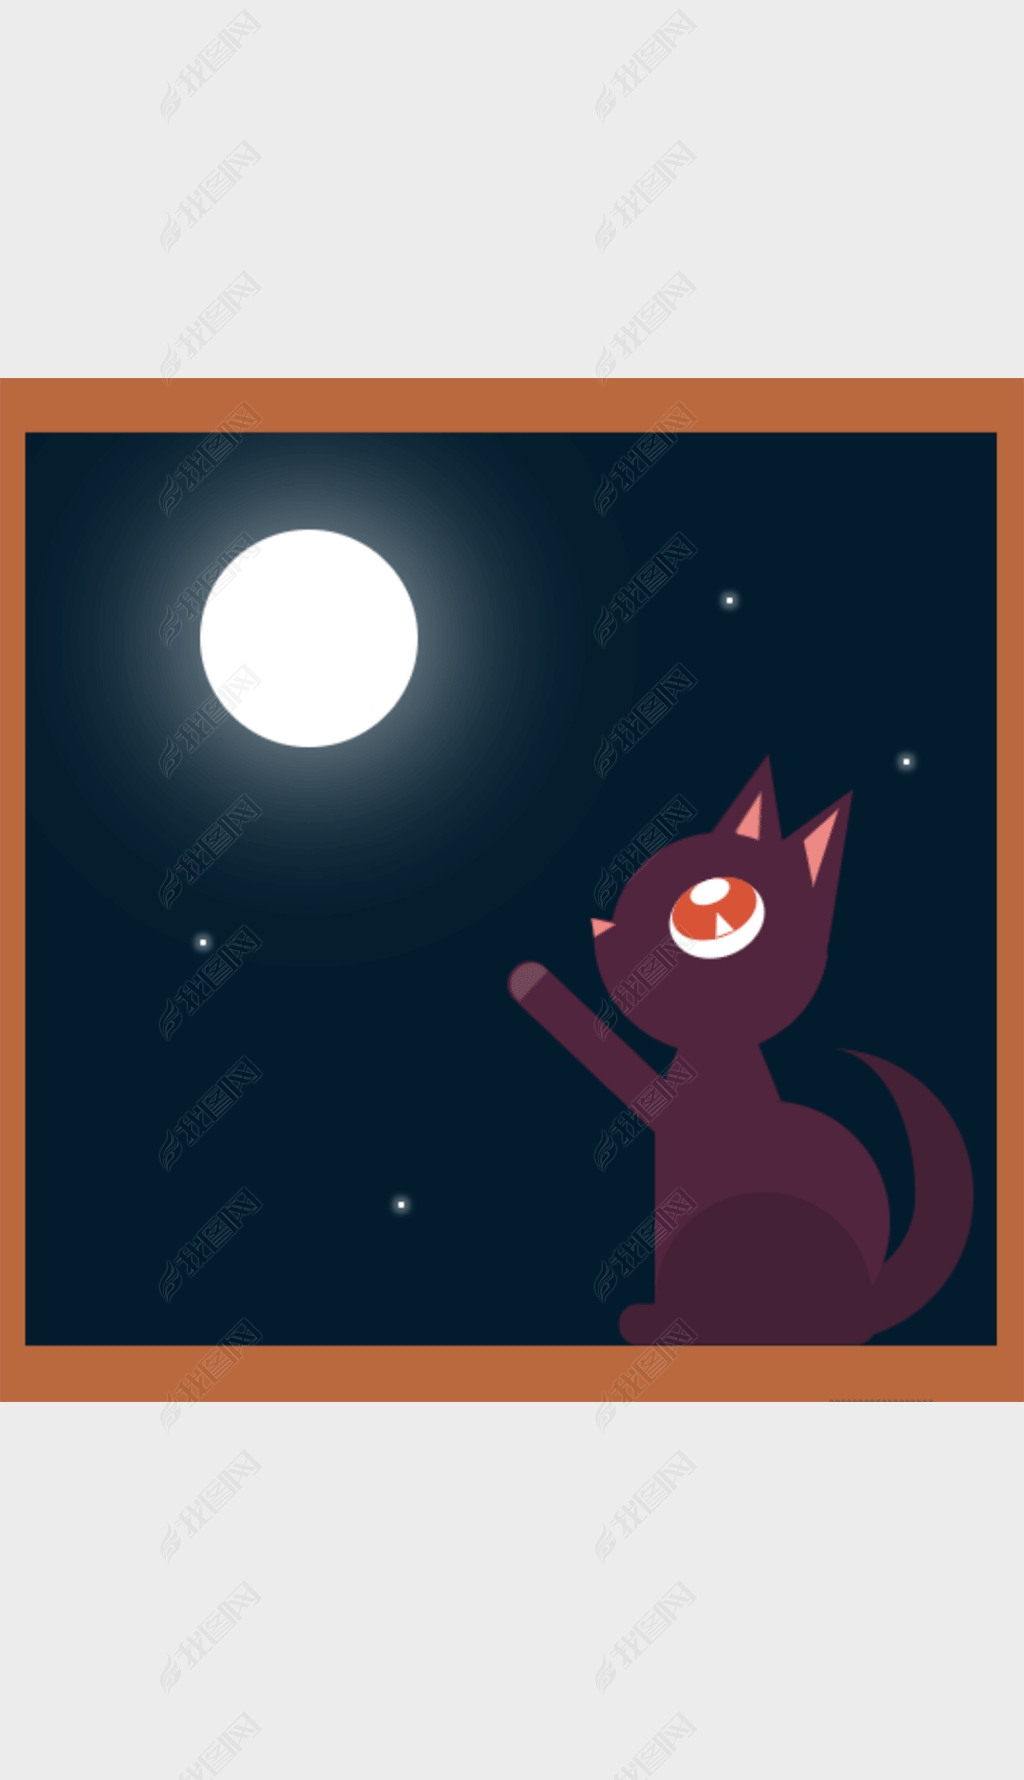 Сè--The cat and the moon